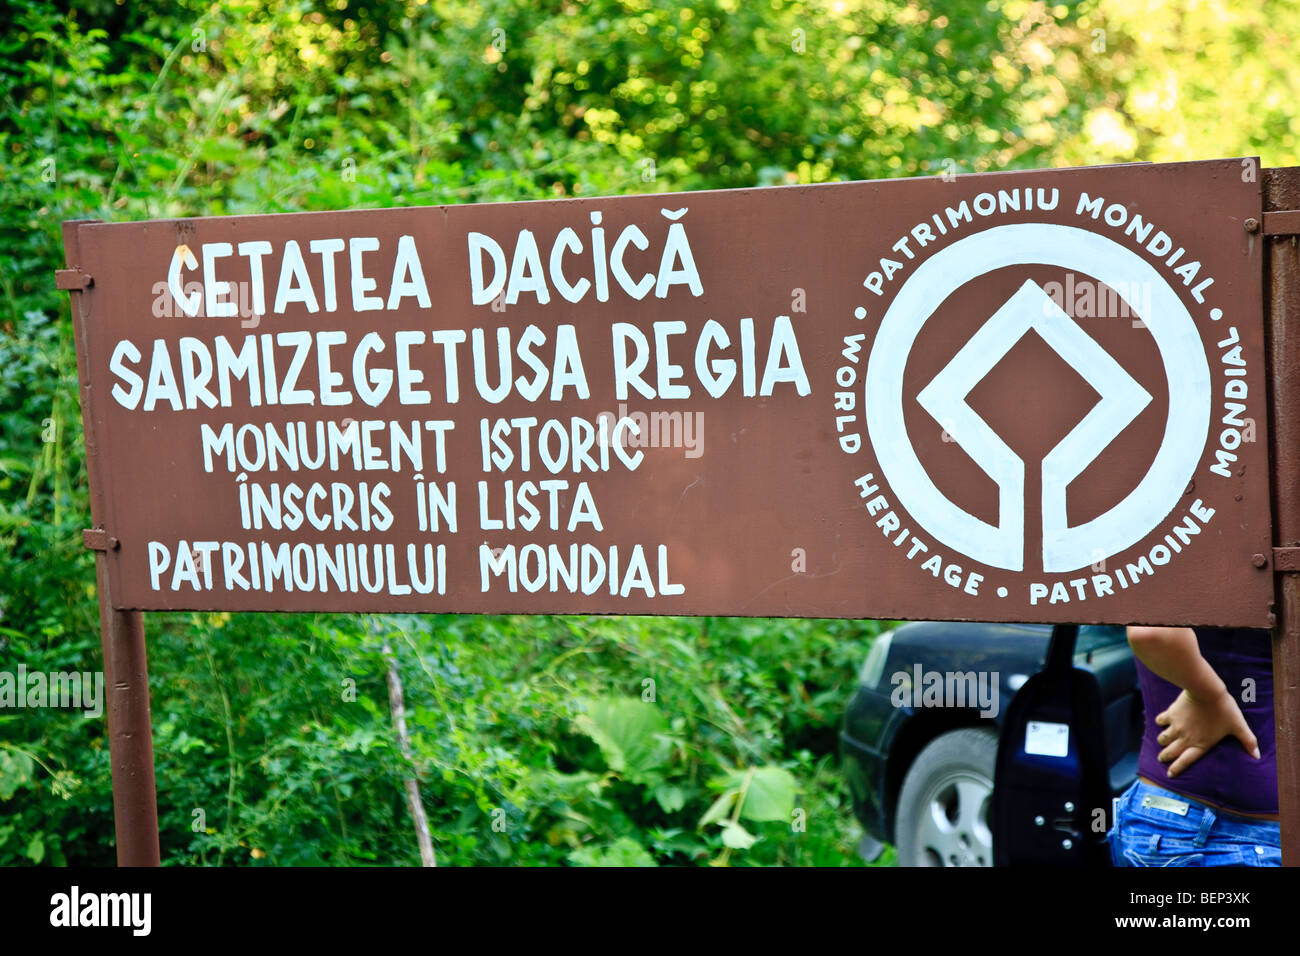 Signpost at the stronghold of Sarmizegetusa regia (the capital of the dacian kingdom before the roman conquest) Romania. Stock Photo